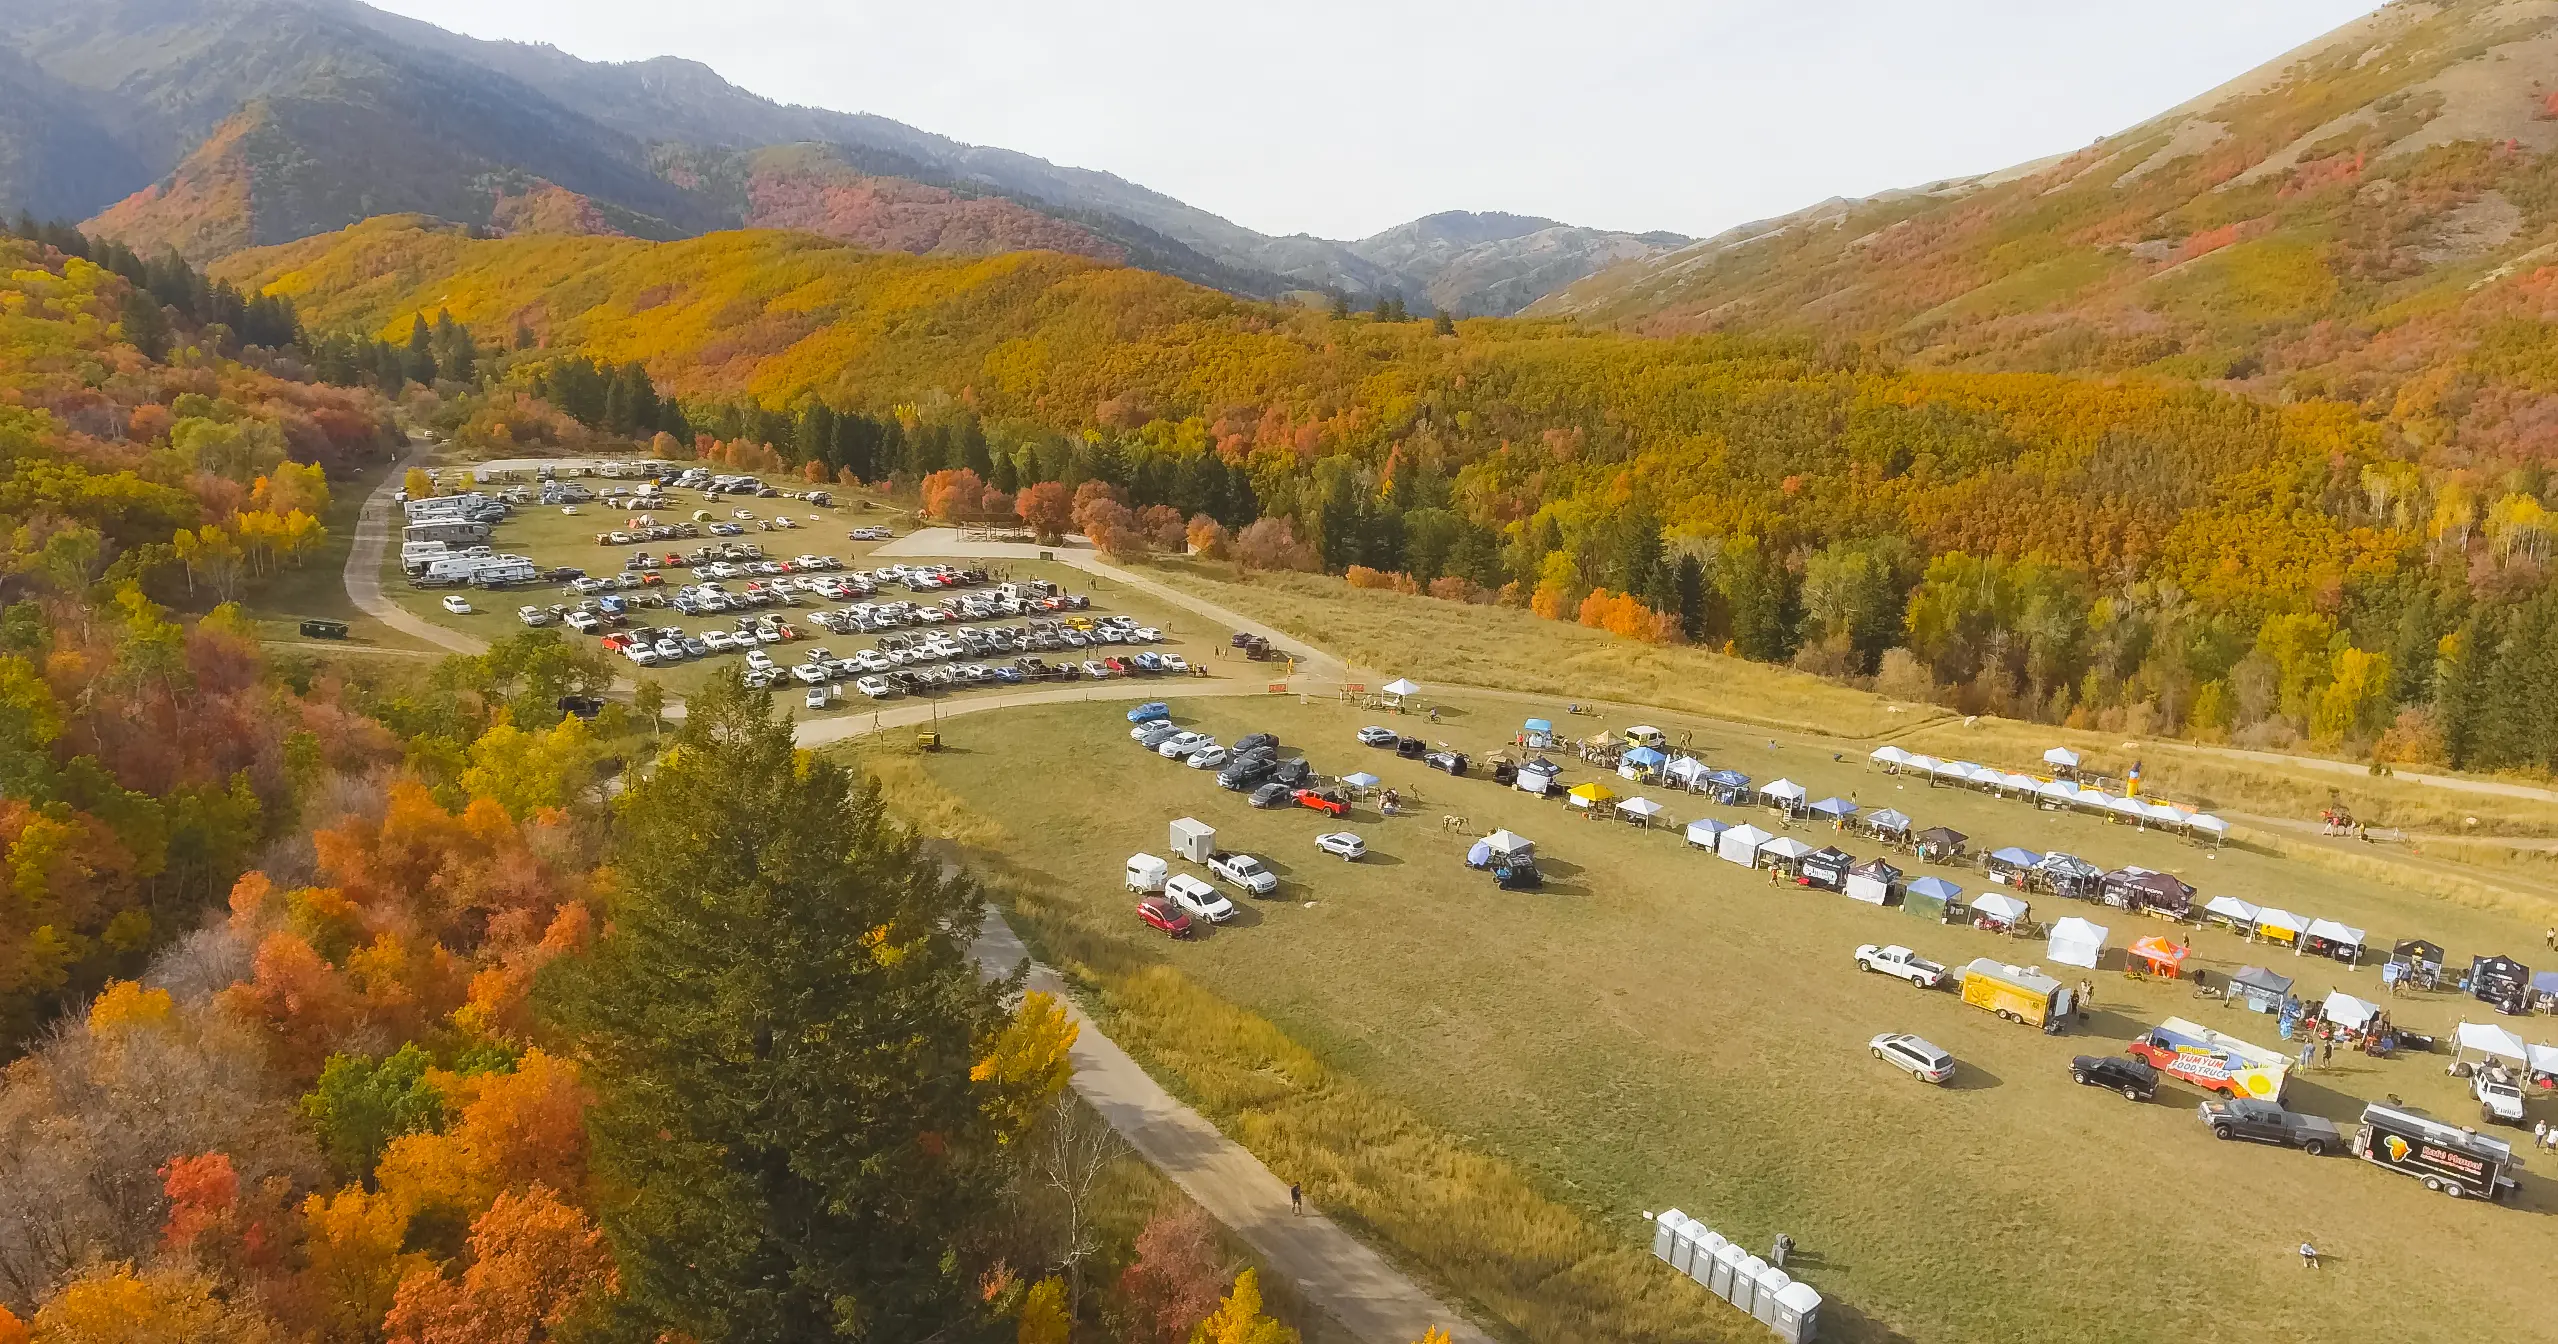 A bird's eye view of North Fork Park with tents, rvs and cars camping for the weekend.